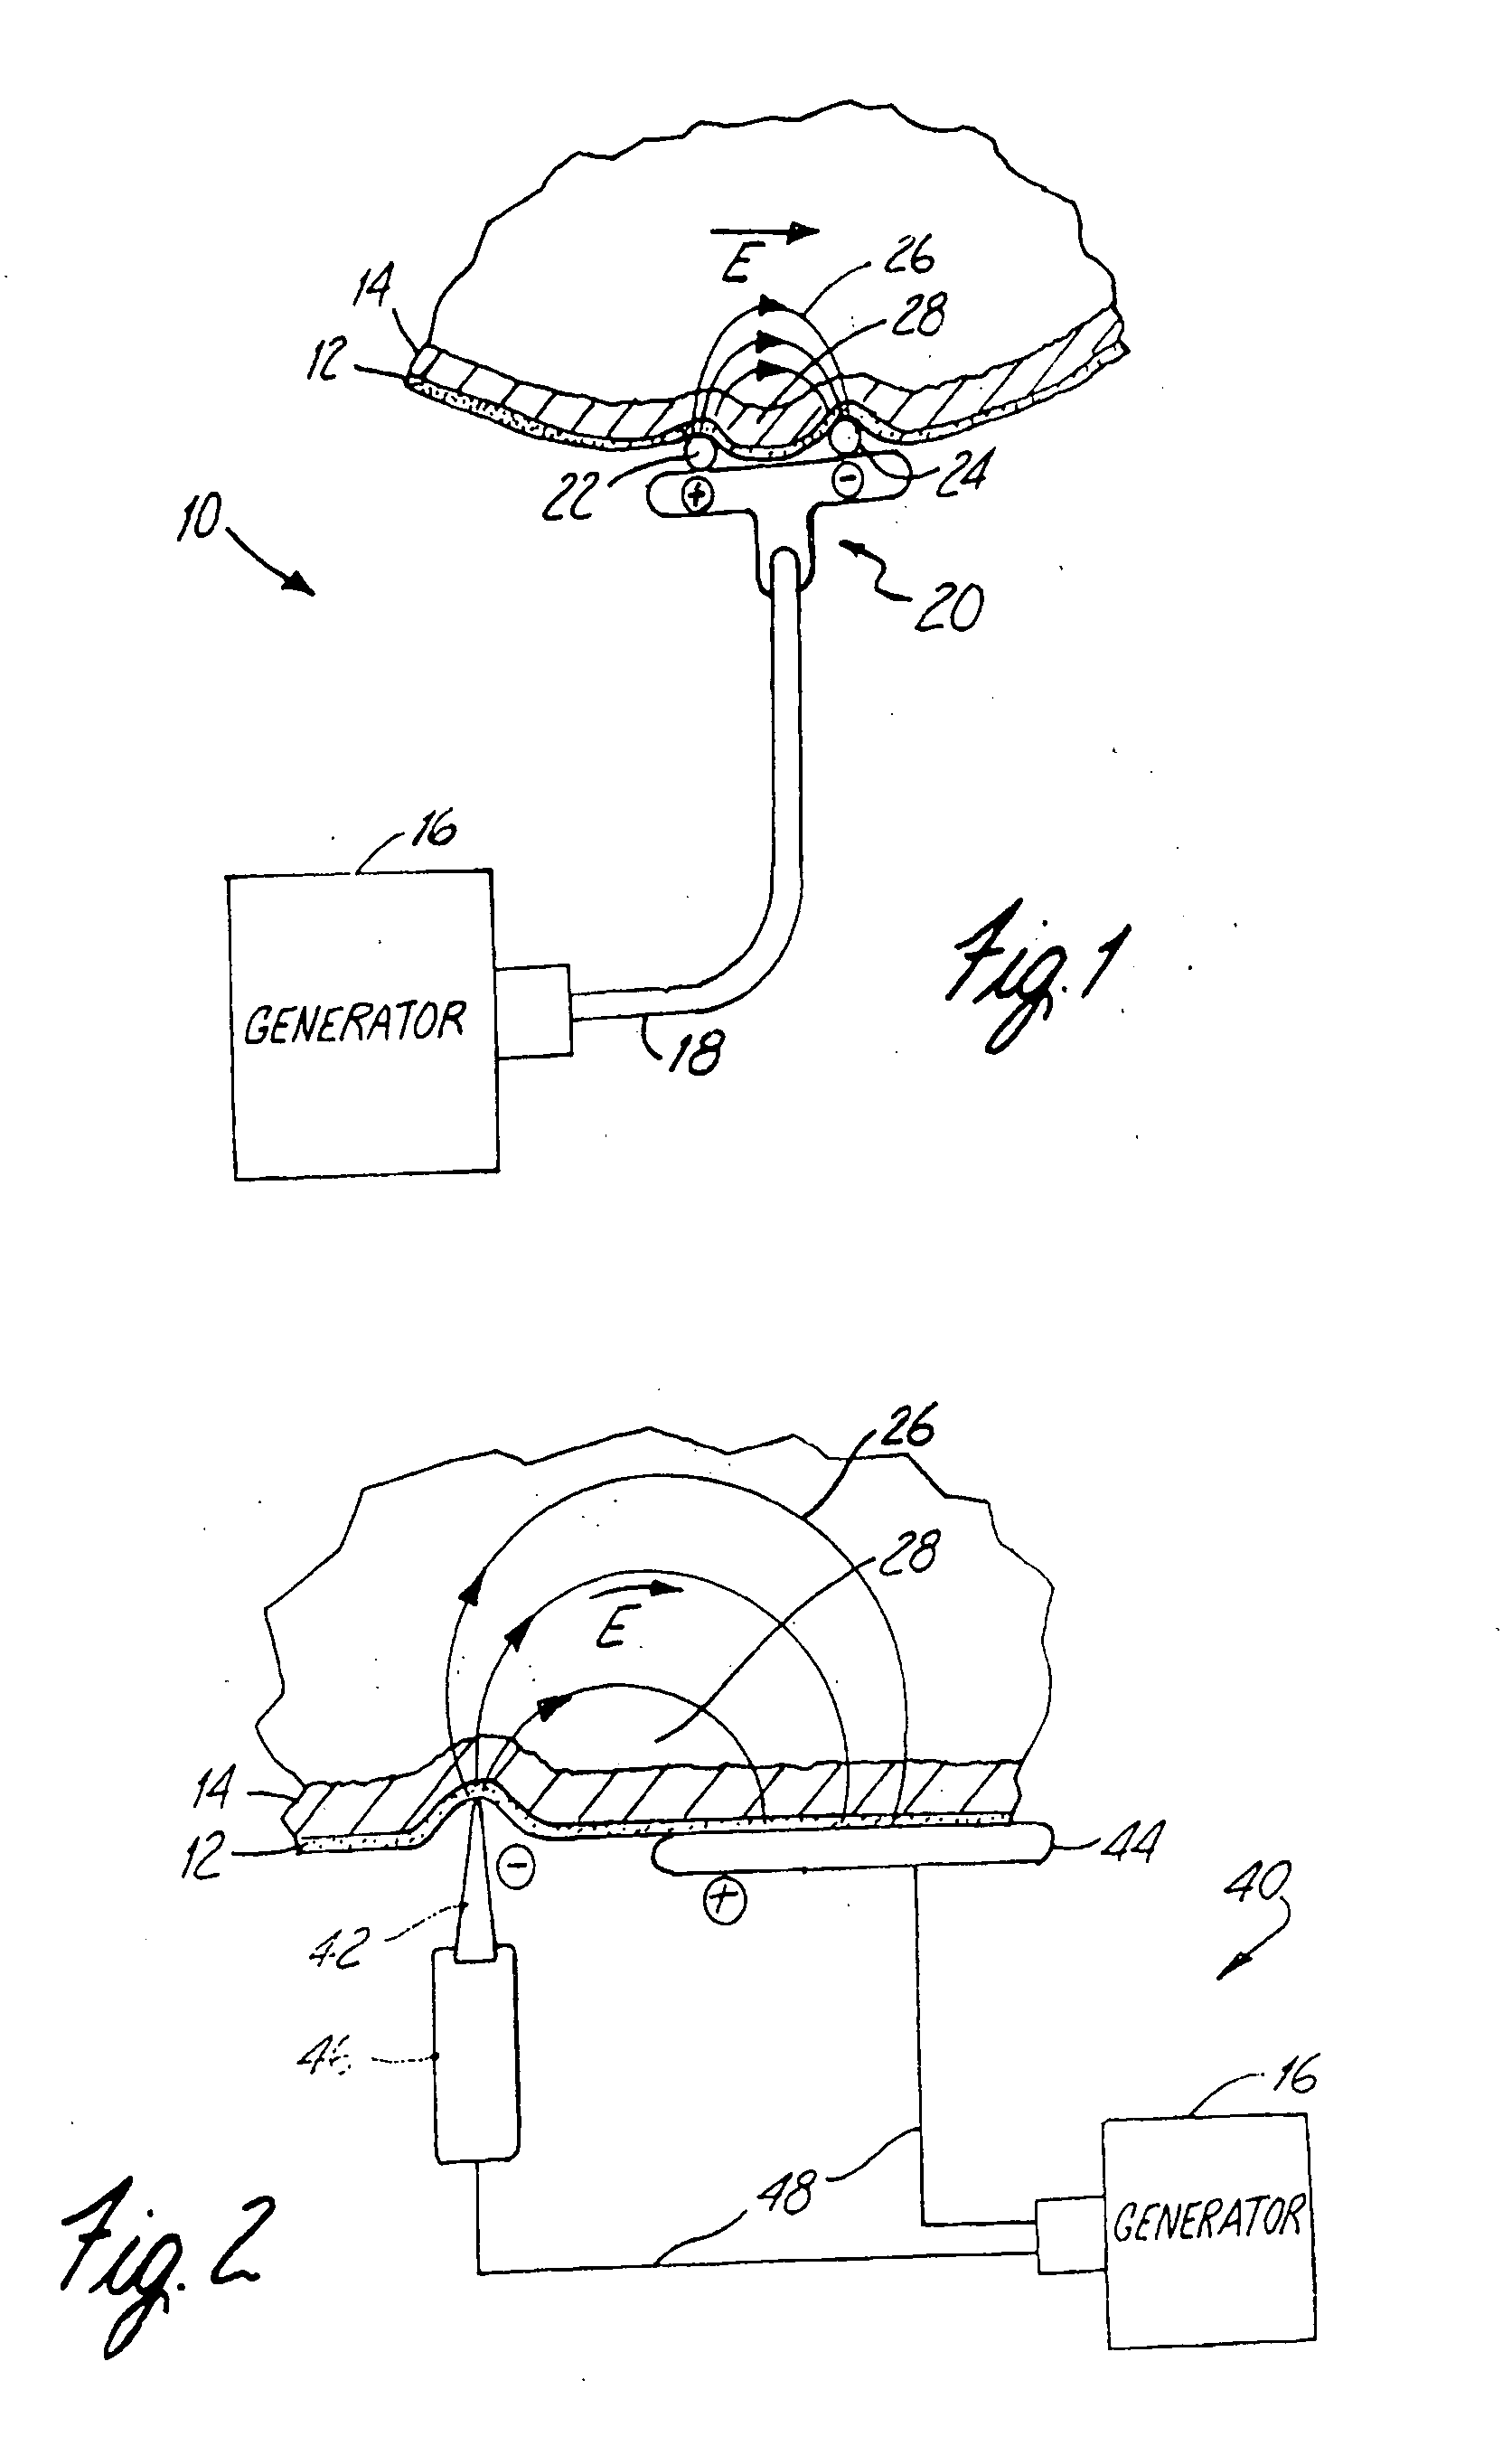 Apparatus and method for reducing subcutaneous fat deposits, virtual face lift and body sculpturing by electroporation